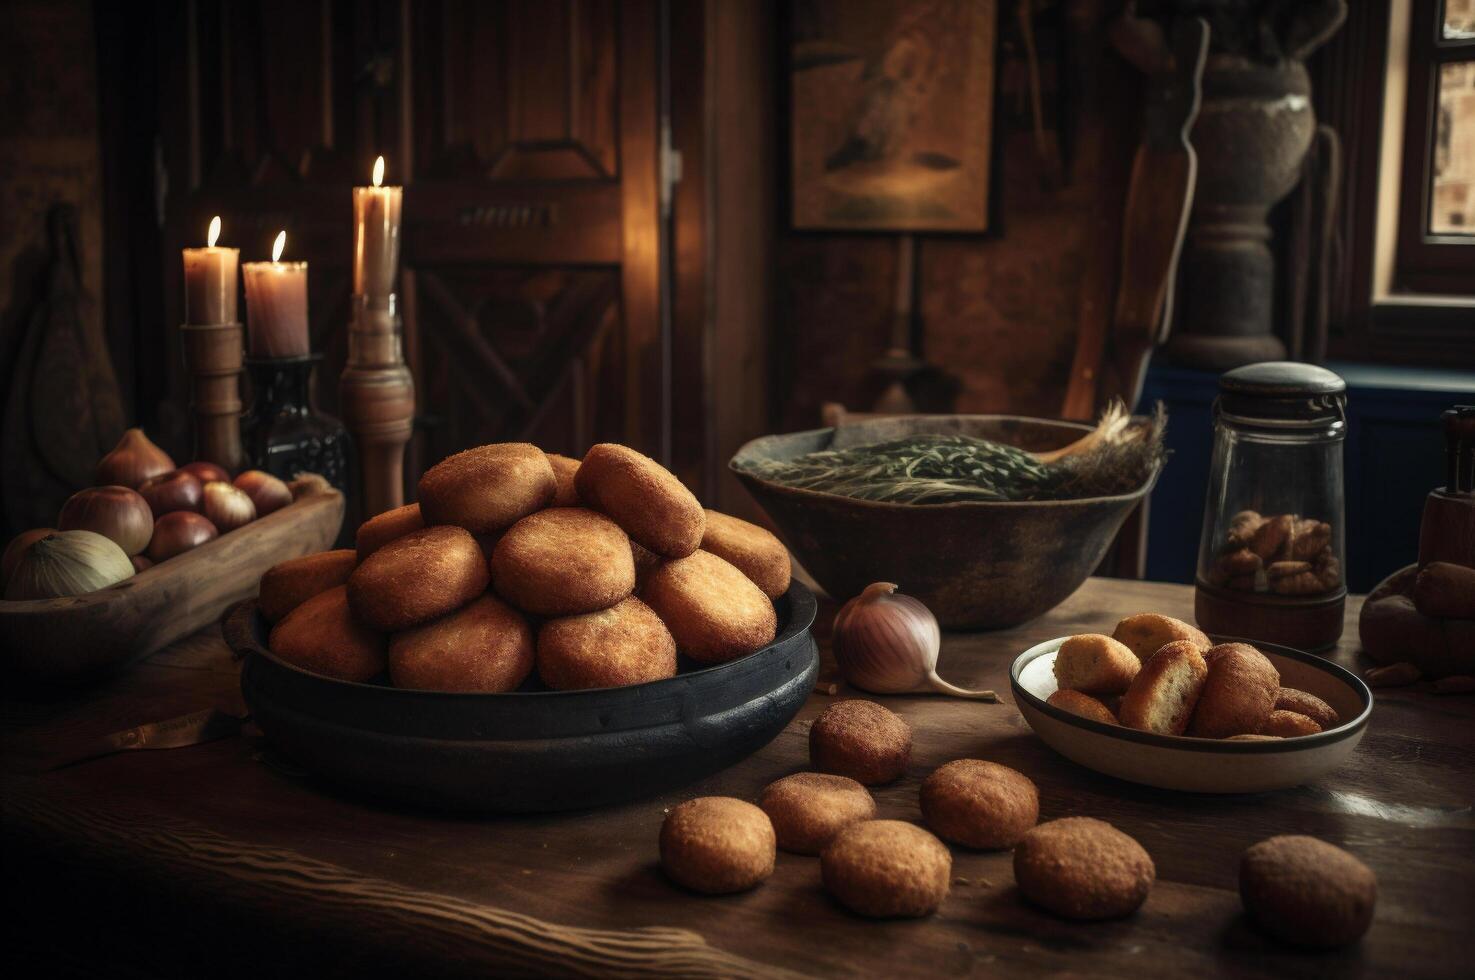 Delicious homemade croquettes on wooden table in rustic kitchen background. photo